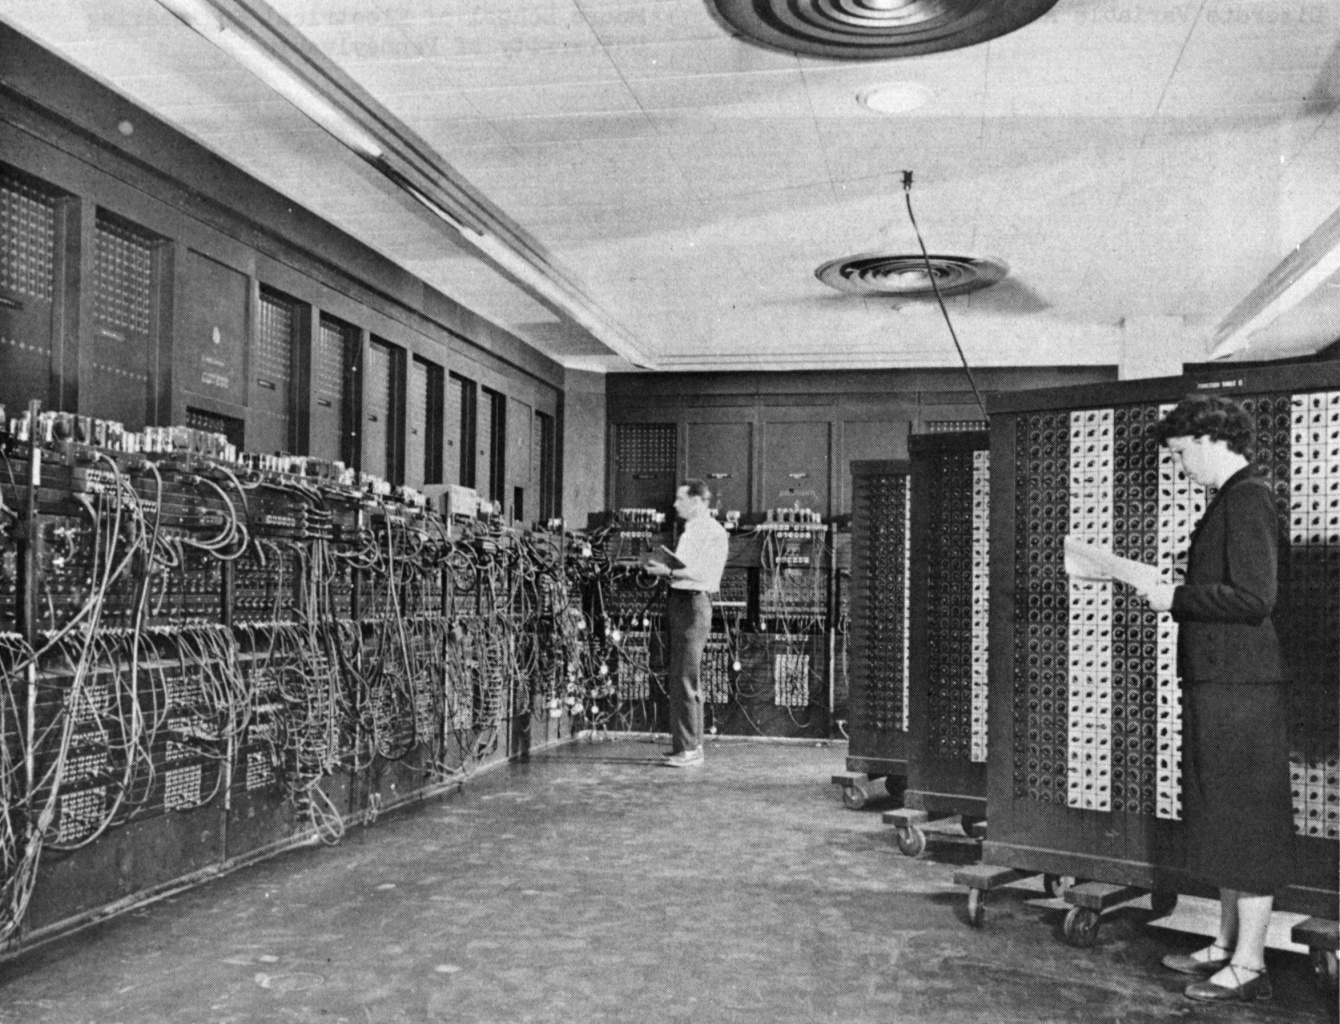 snyder working with the eniac